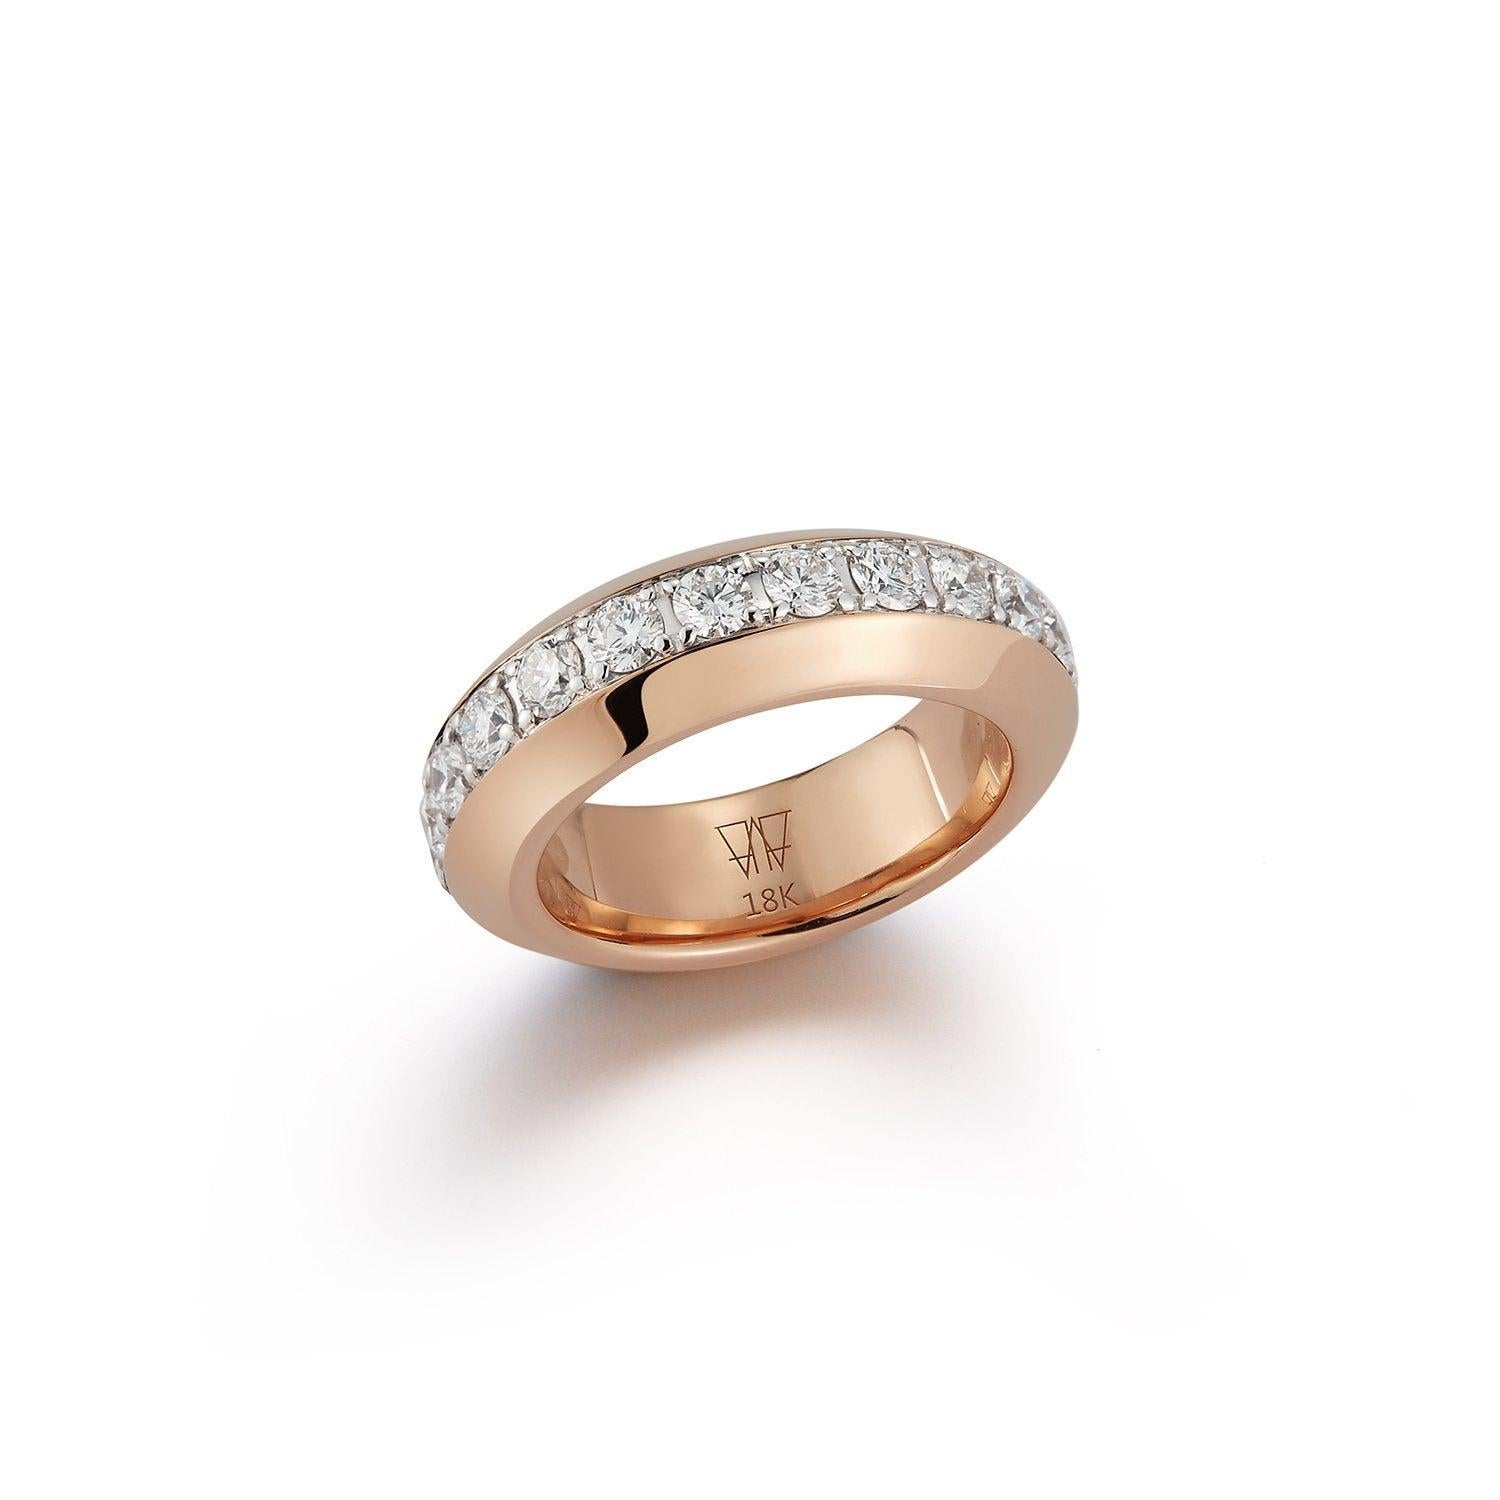 For Sale:  Walters Faith 18K Rose Gold and White Diamond Angled Band Ring 4